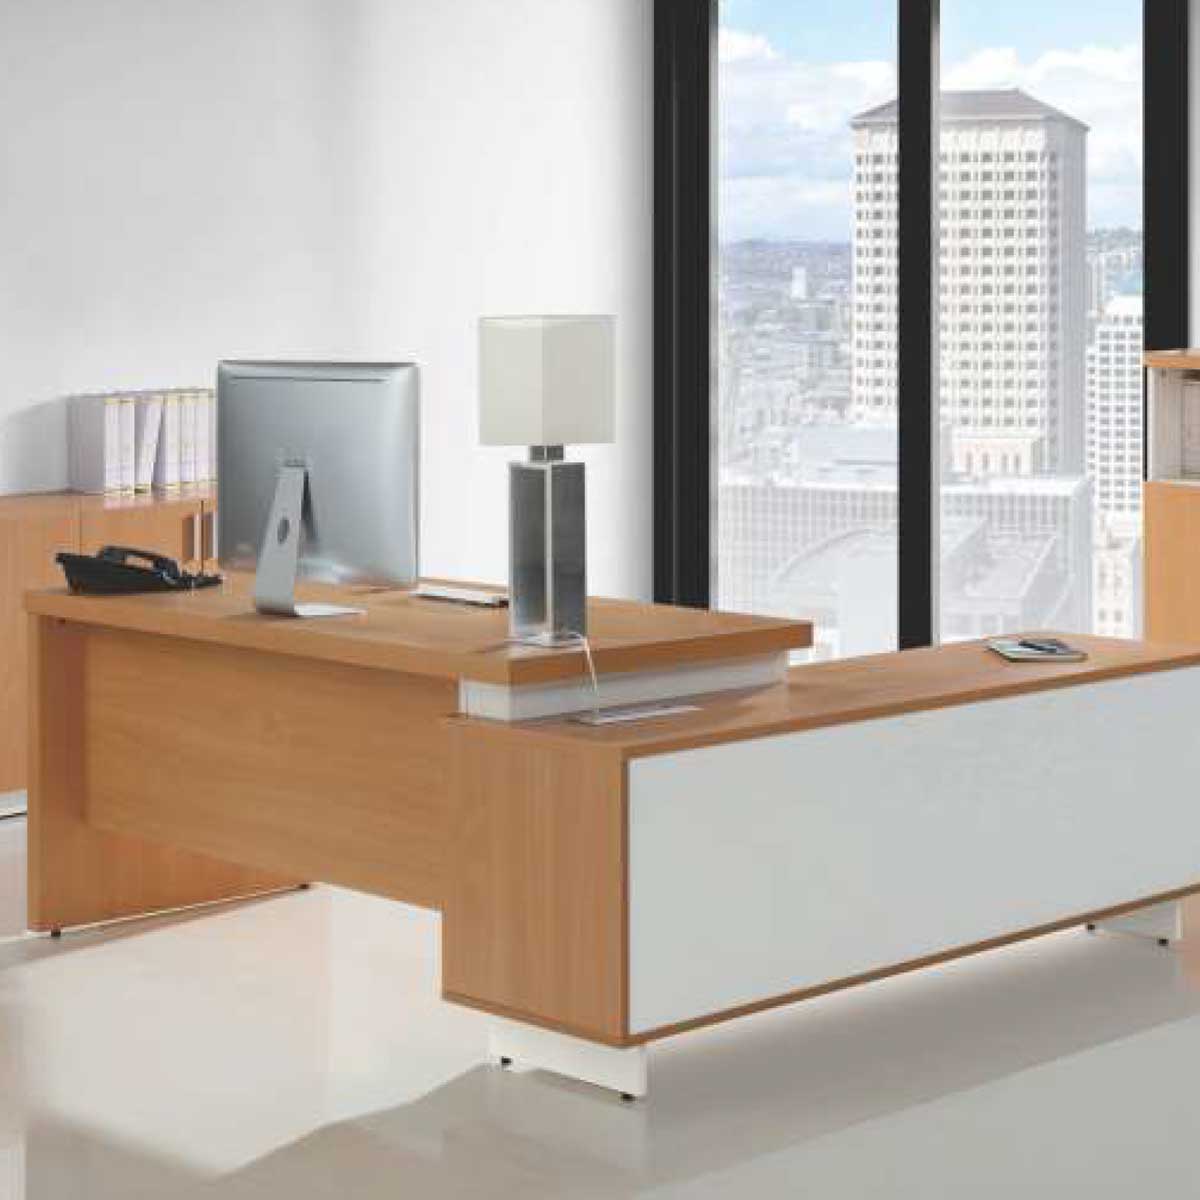 Boss Table Manufacturers, Suppliers in Noida City Center